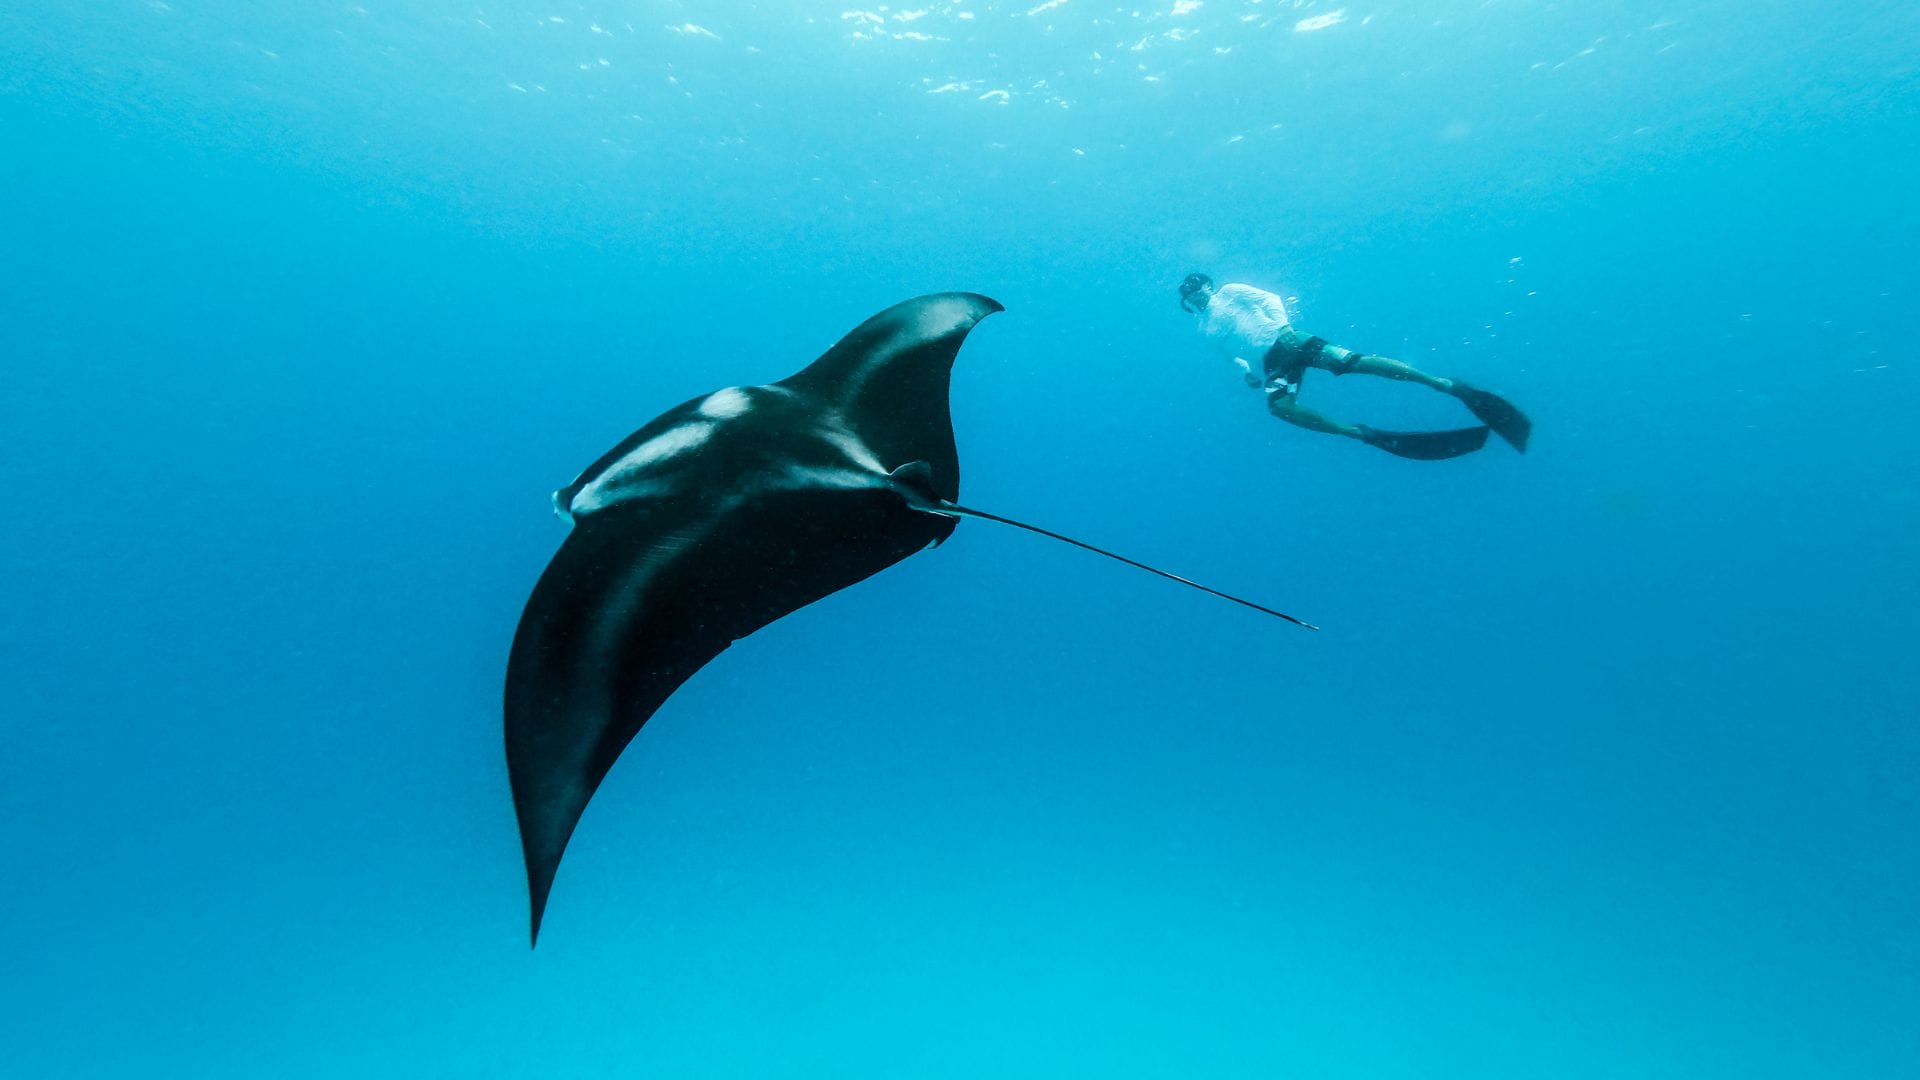 Maintaining-Respectful-Distance-from-Manta-Rays